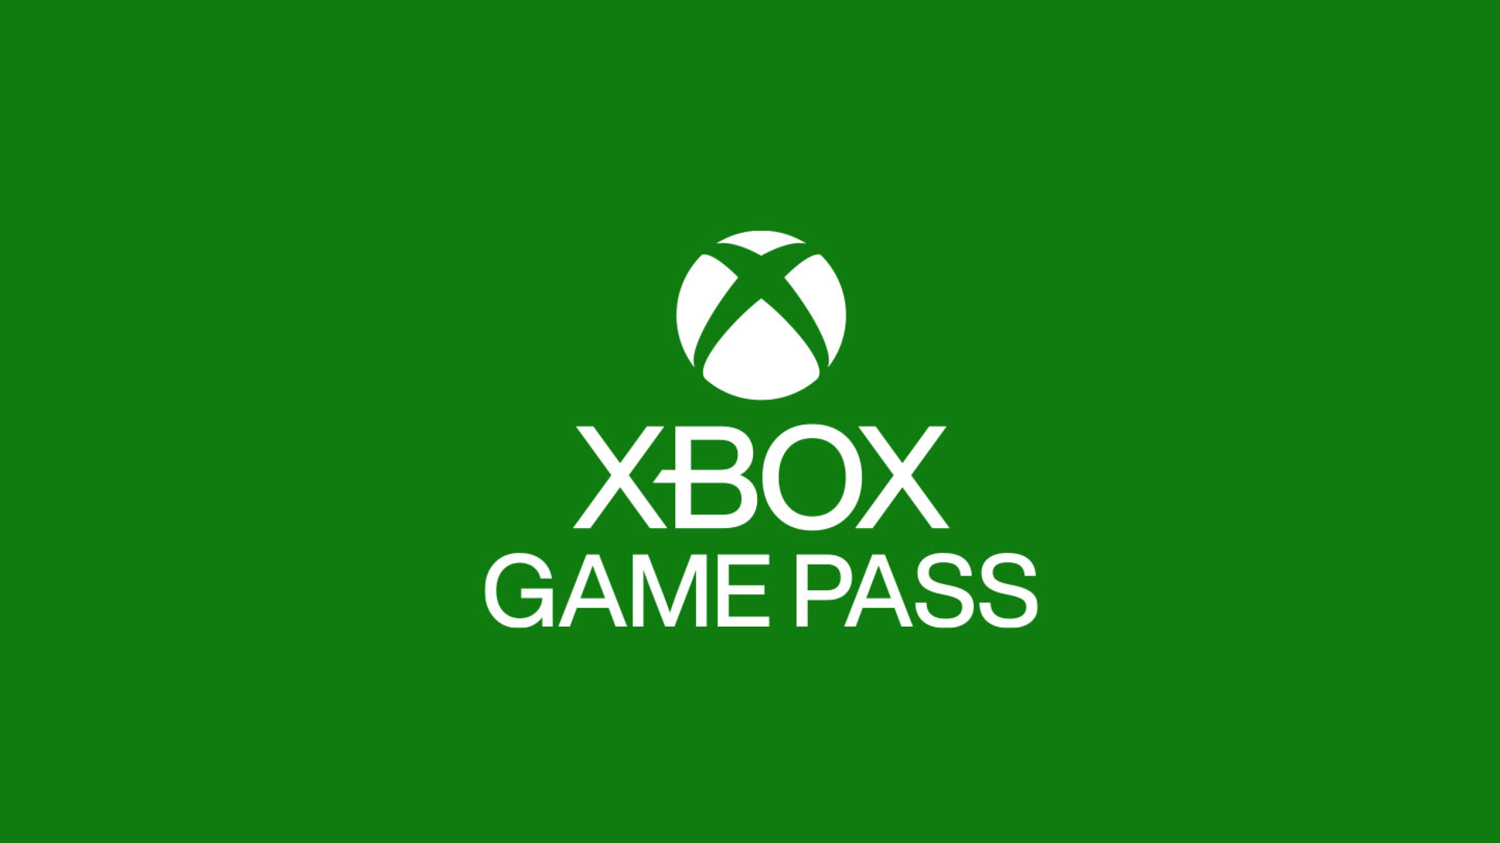 Xbox begins work bringing Activision titles to Game Pass right away